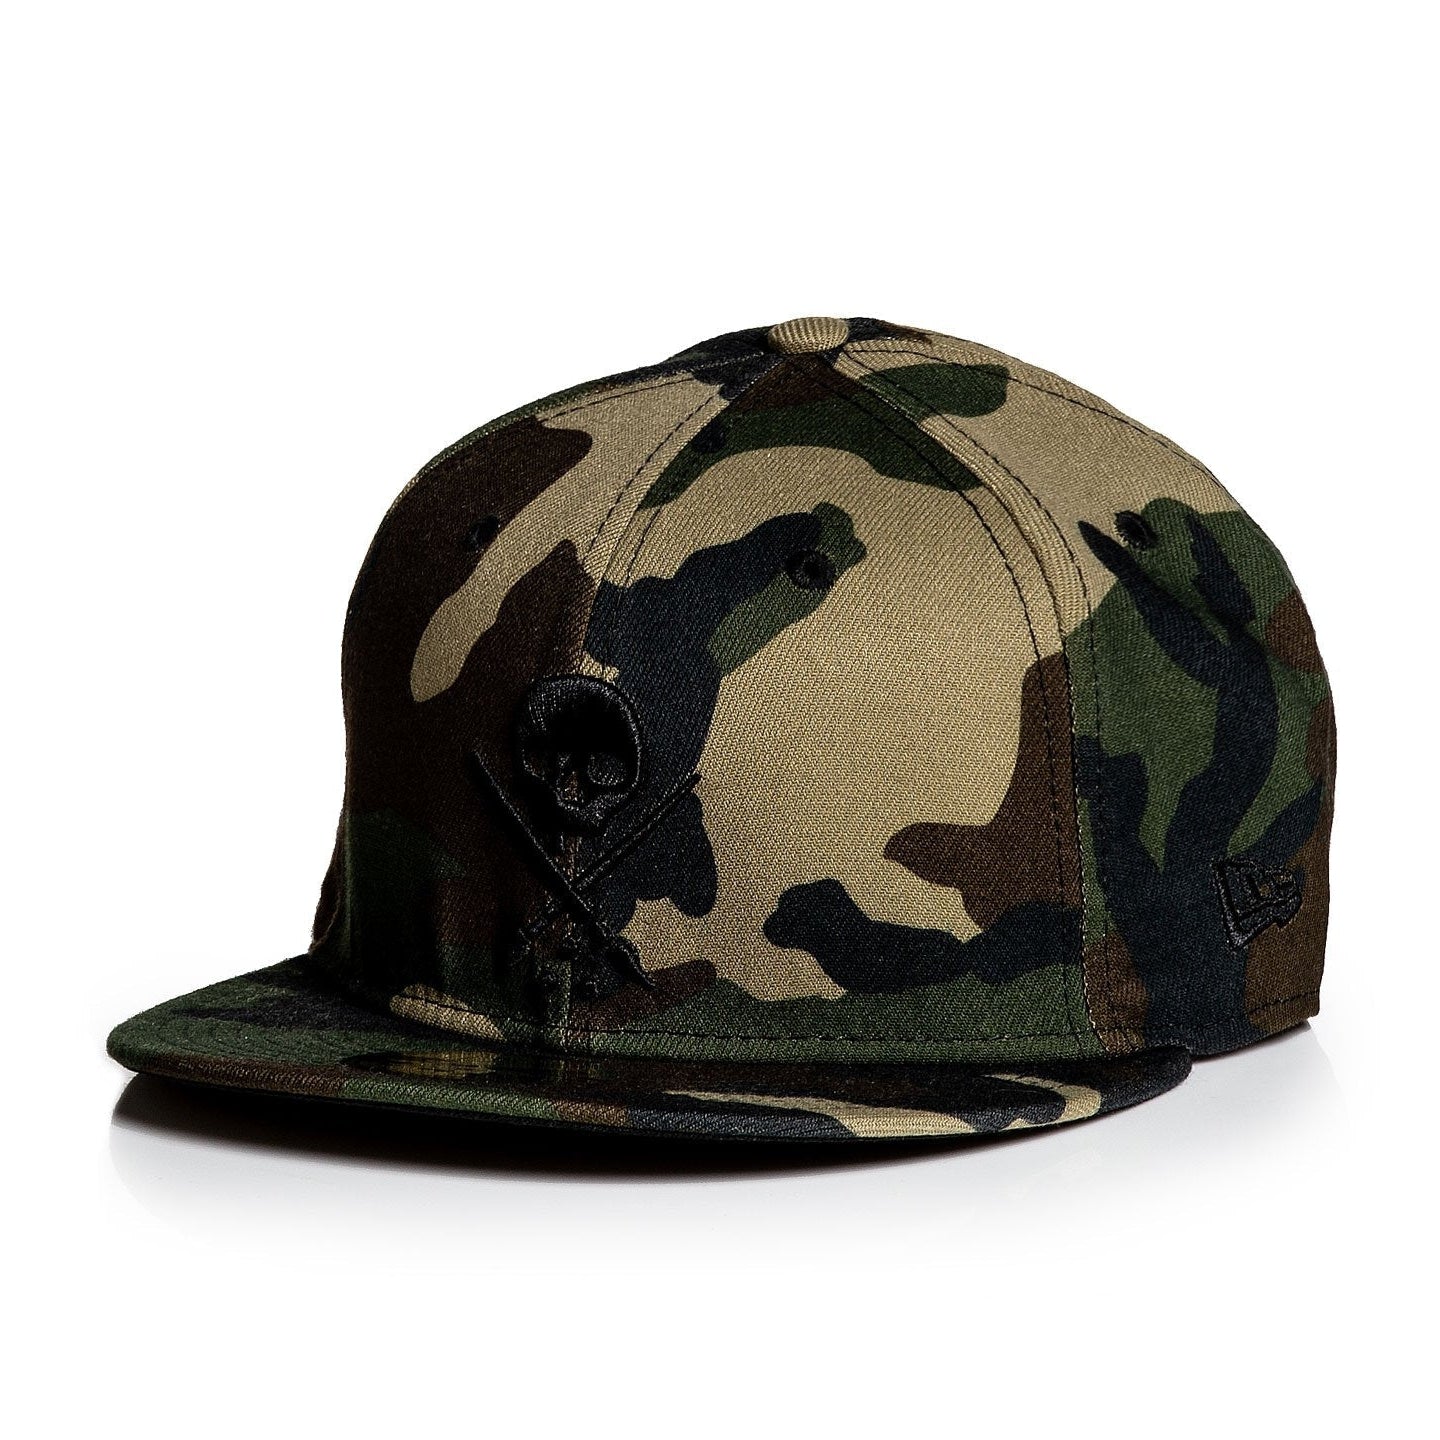 Sullen Badge Camo Stretched Fitted Cap-Mens Beanies, Hats & Snapback Caps-Scarlett Dawn